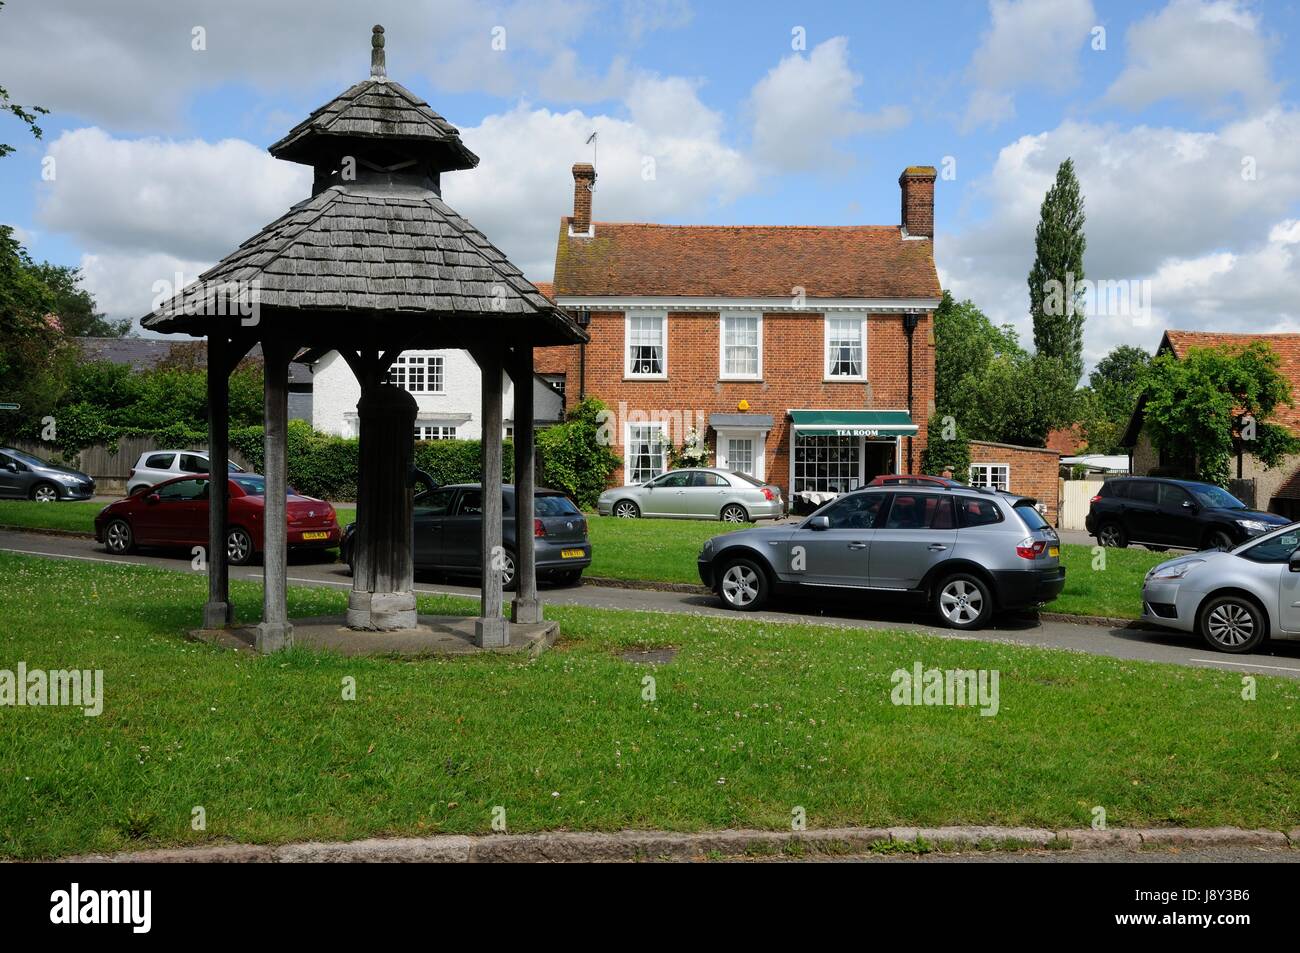 Pump & Shelter and Tea Room,Westmill, Hertfordshire. Westmill Tea Room  provides breakfasts, lunches and delicious afternoon teas to local residents,  Stock Photo